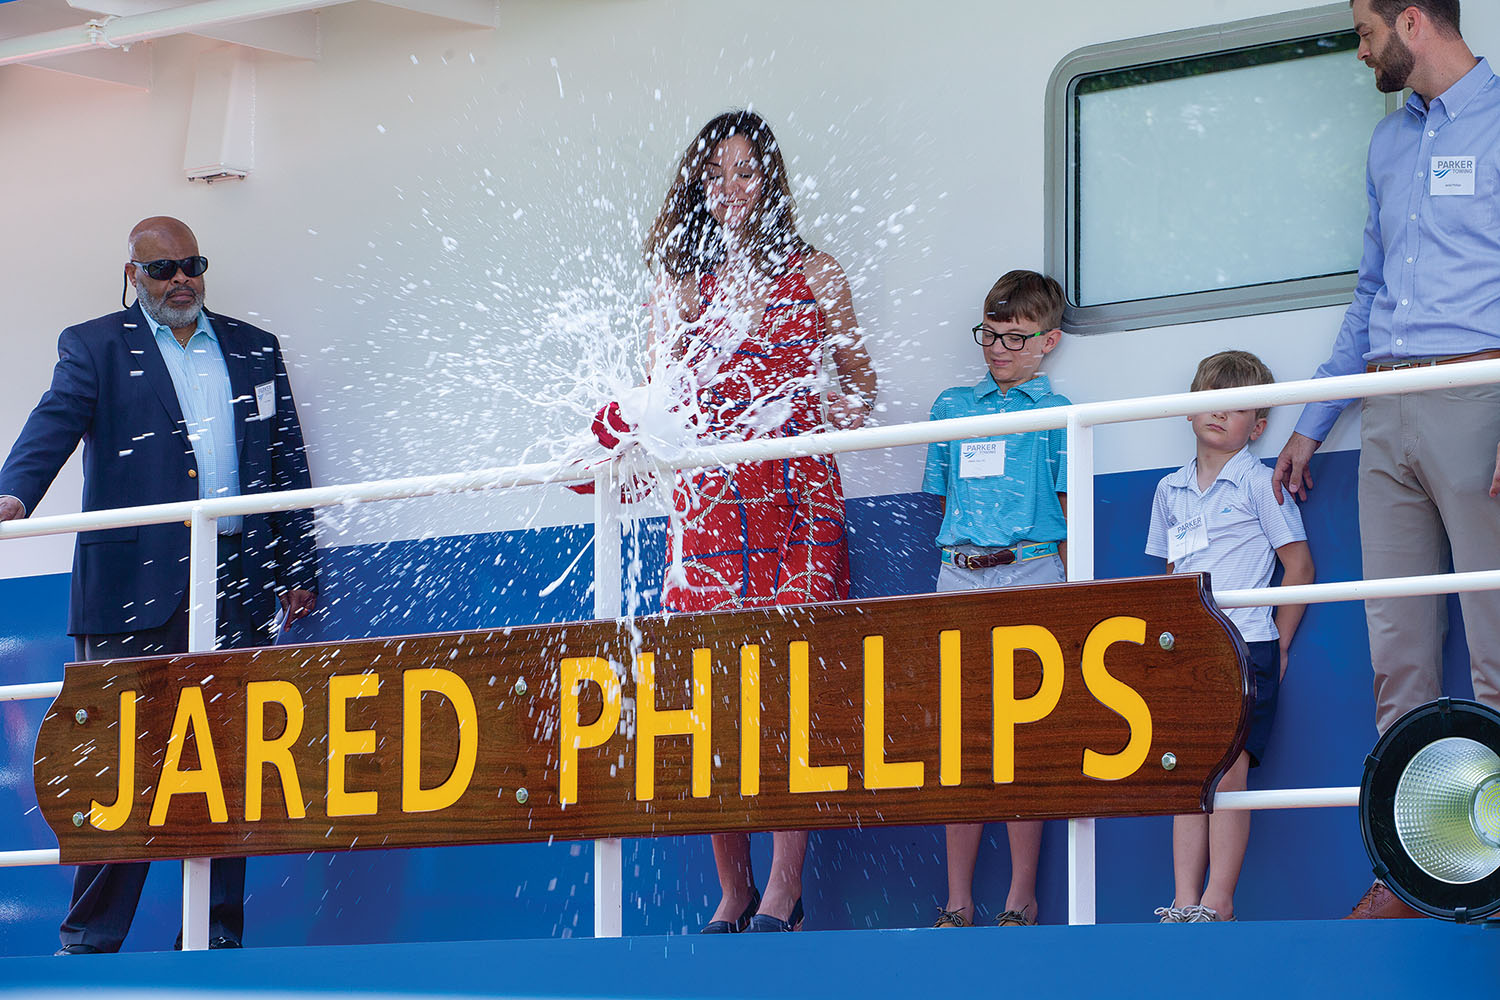 Alison Phillips smashes a bottle of champagne to christen the mv. Jared Phillips. (Frank McCormack photo)